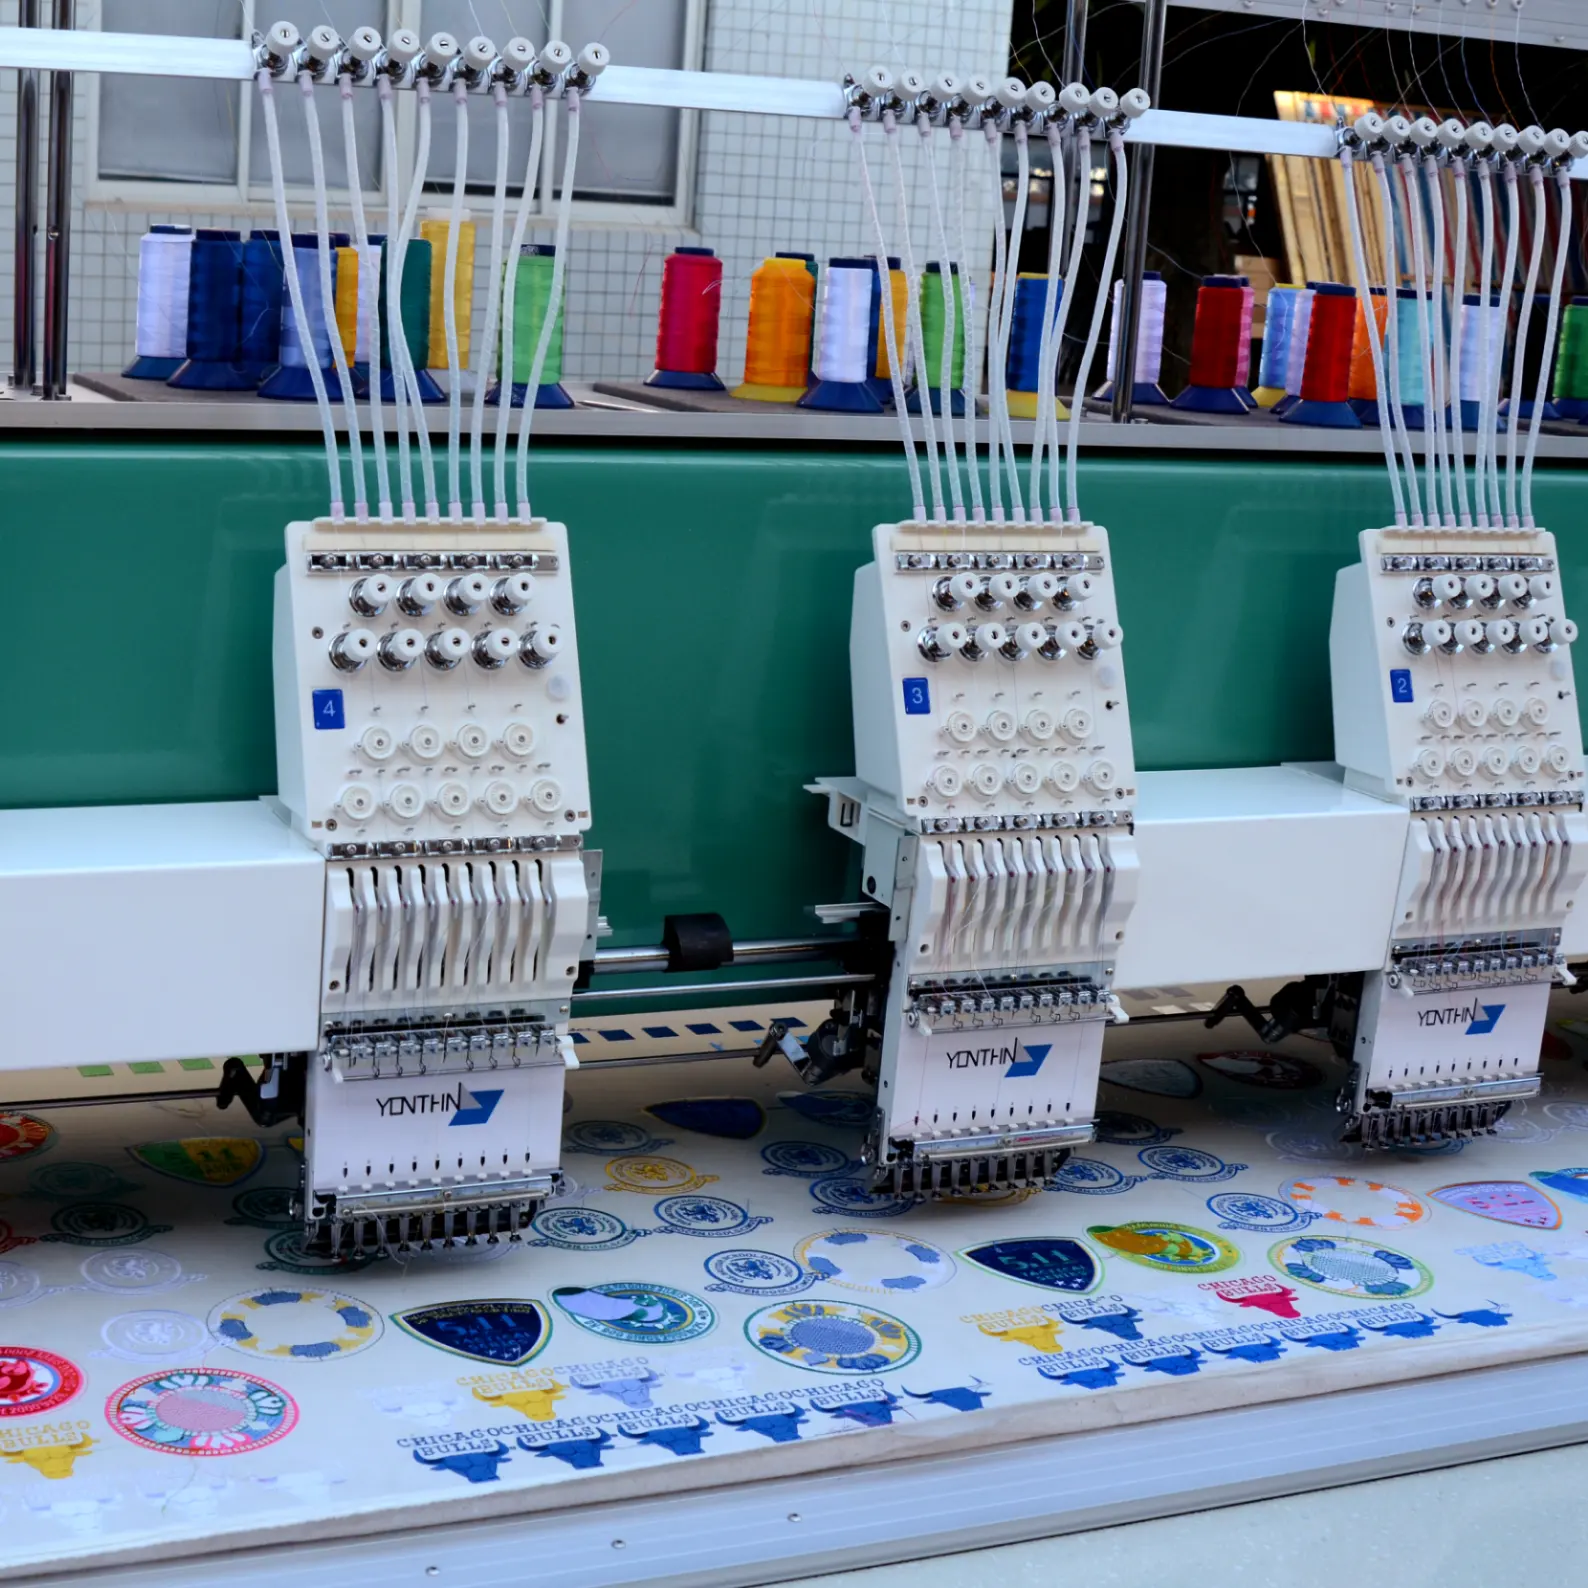 Yonthin High Speed Tajima Computer 24 Head Embroidery Machine Suppliers Prices For Sale Computerized Used Clothes